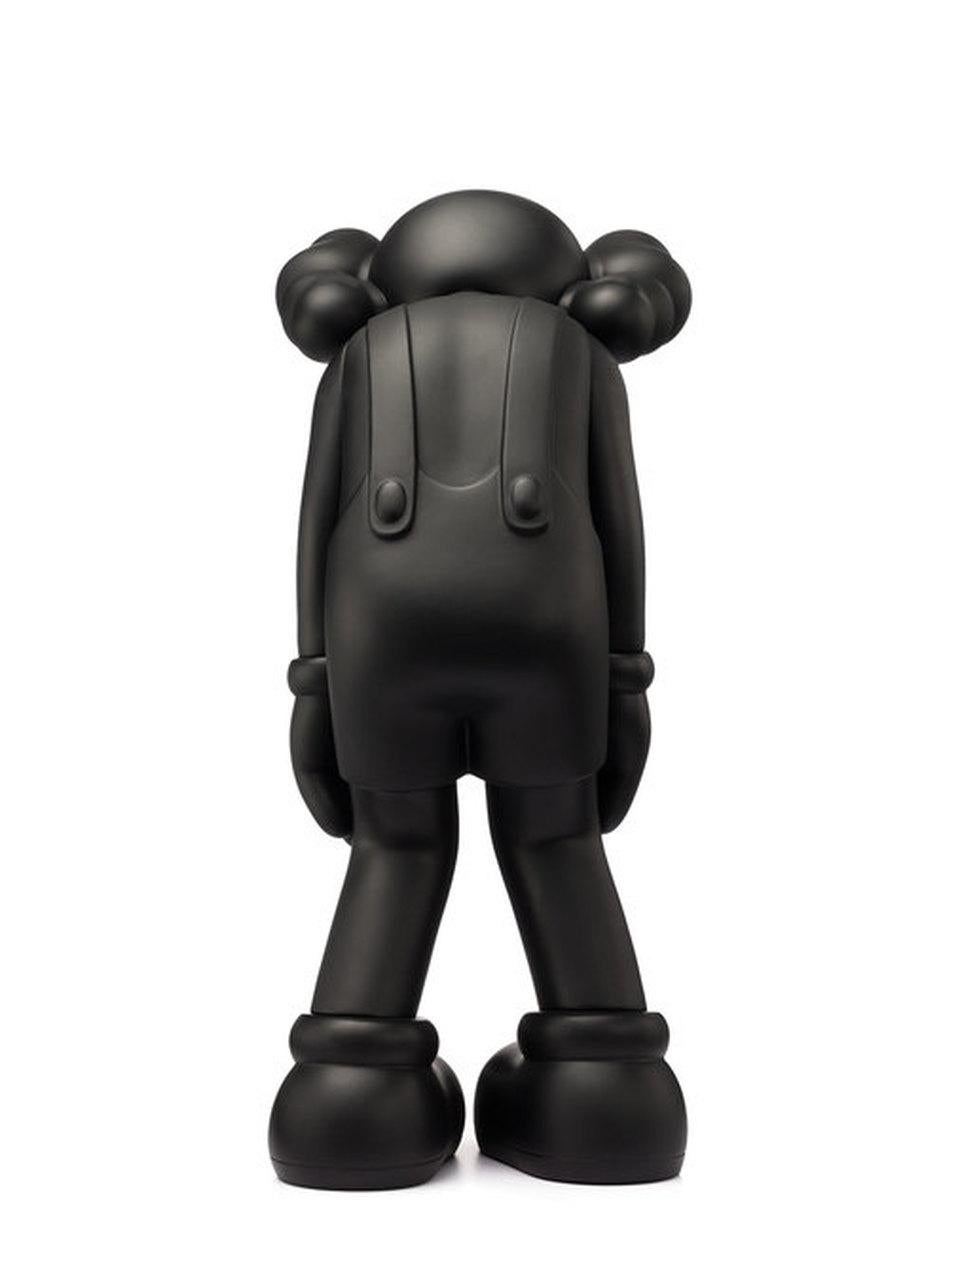 kaws statues for sale